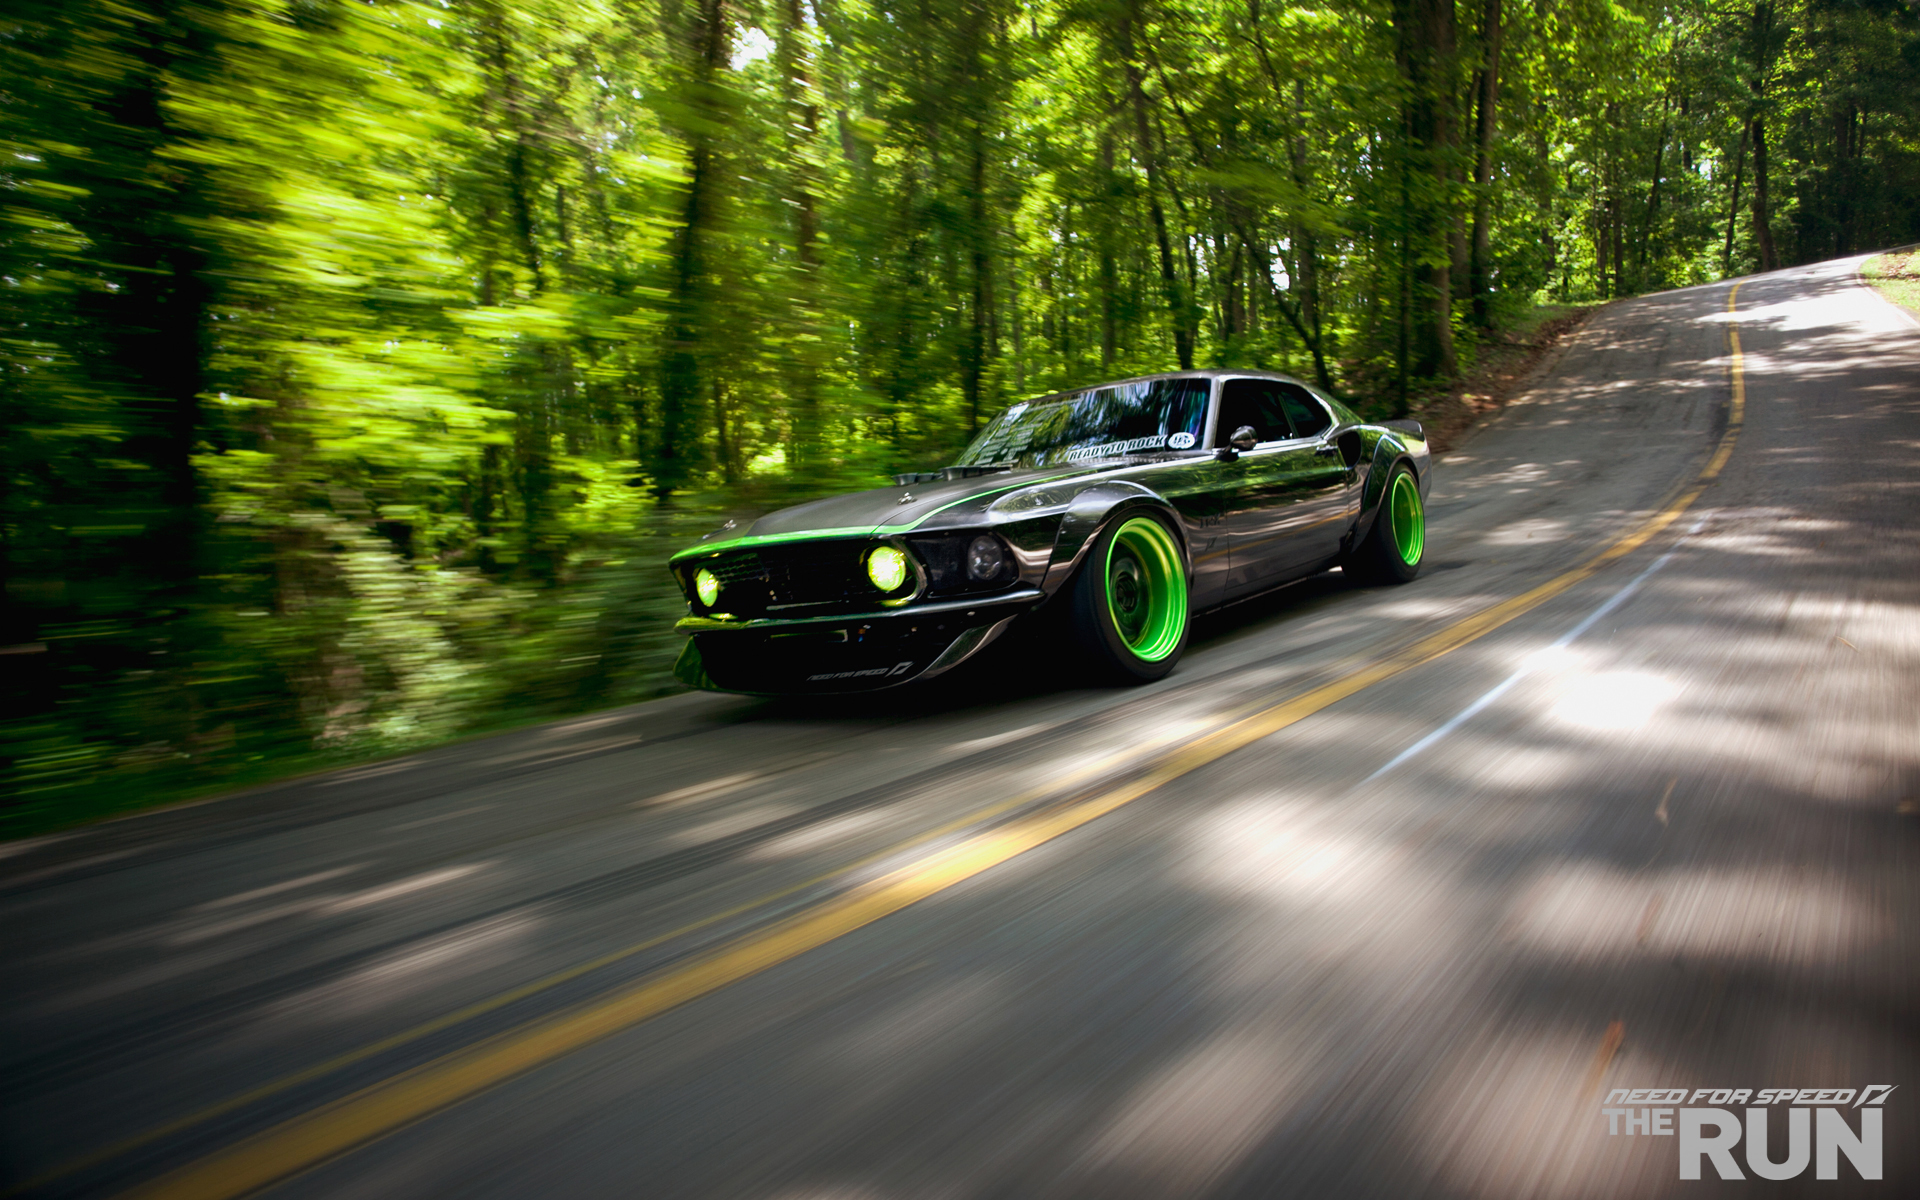 Classic Car Classic Ford Mustang Trees Road Motion Blur Hd Wallpaper Cars Wallpaper Better